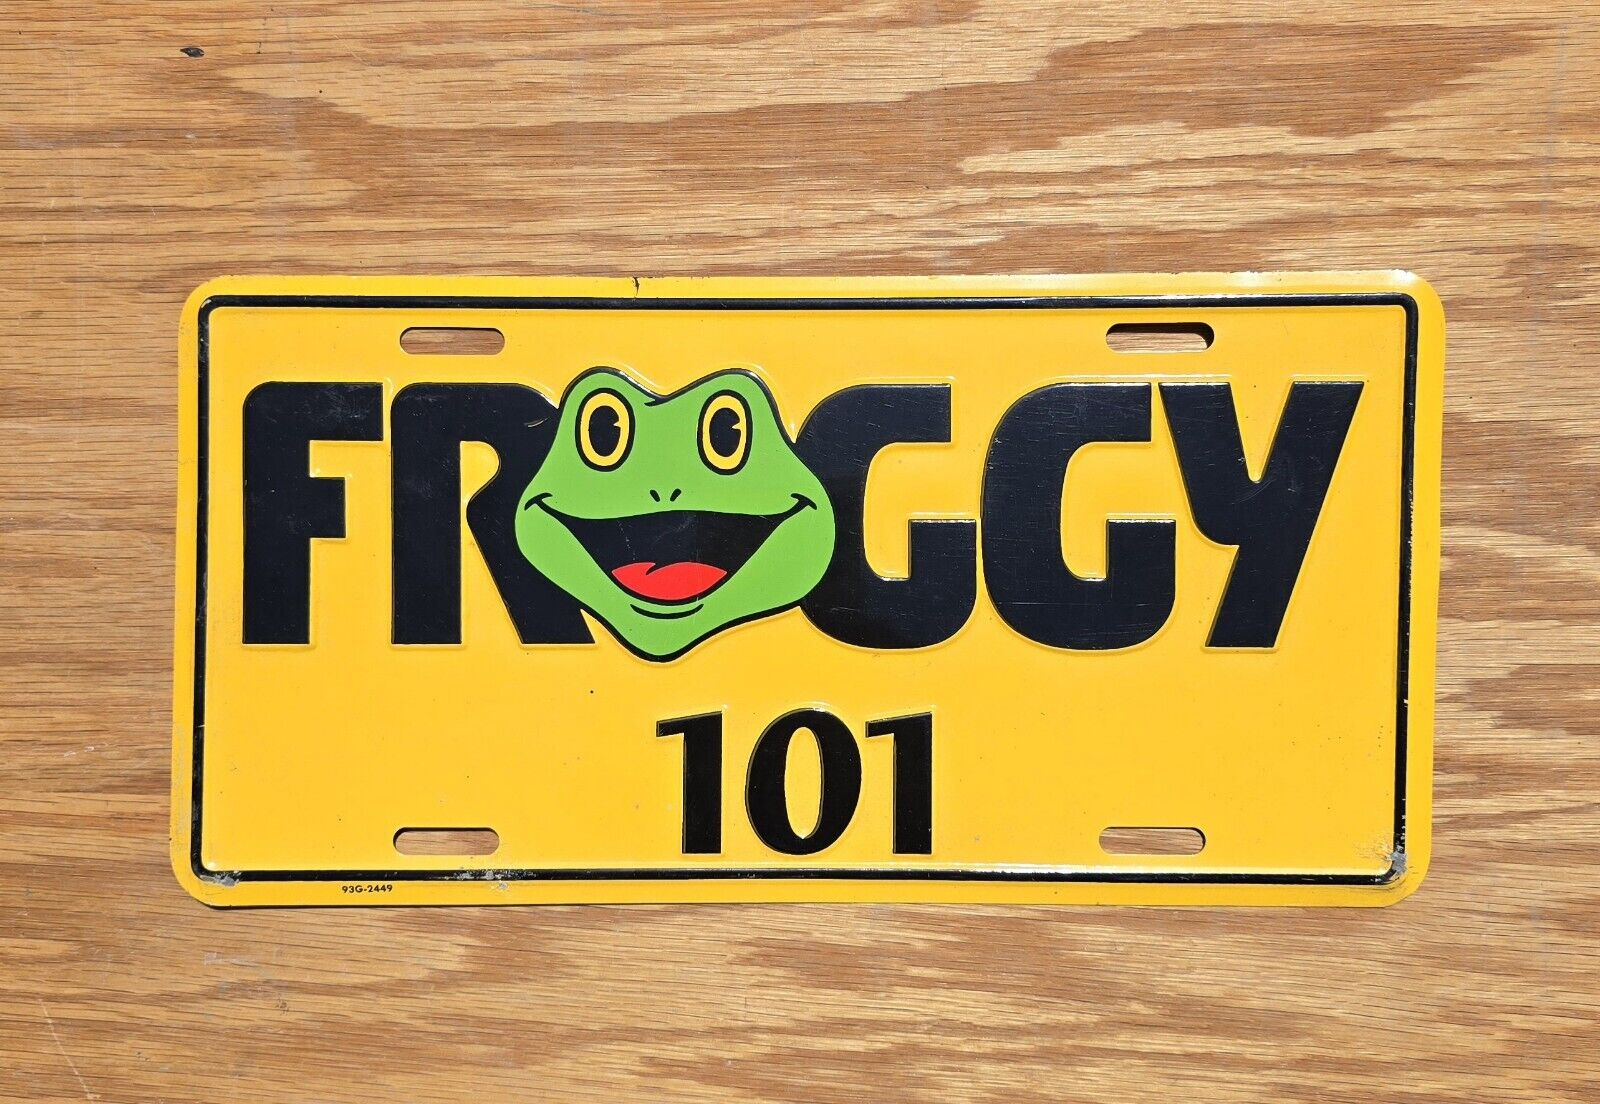 Froggy 101 Metal Booster License Plate -  Pennsylvania - The Office